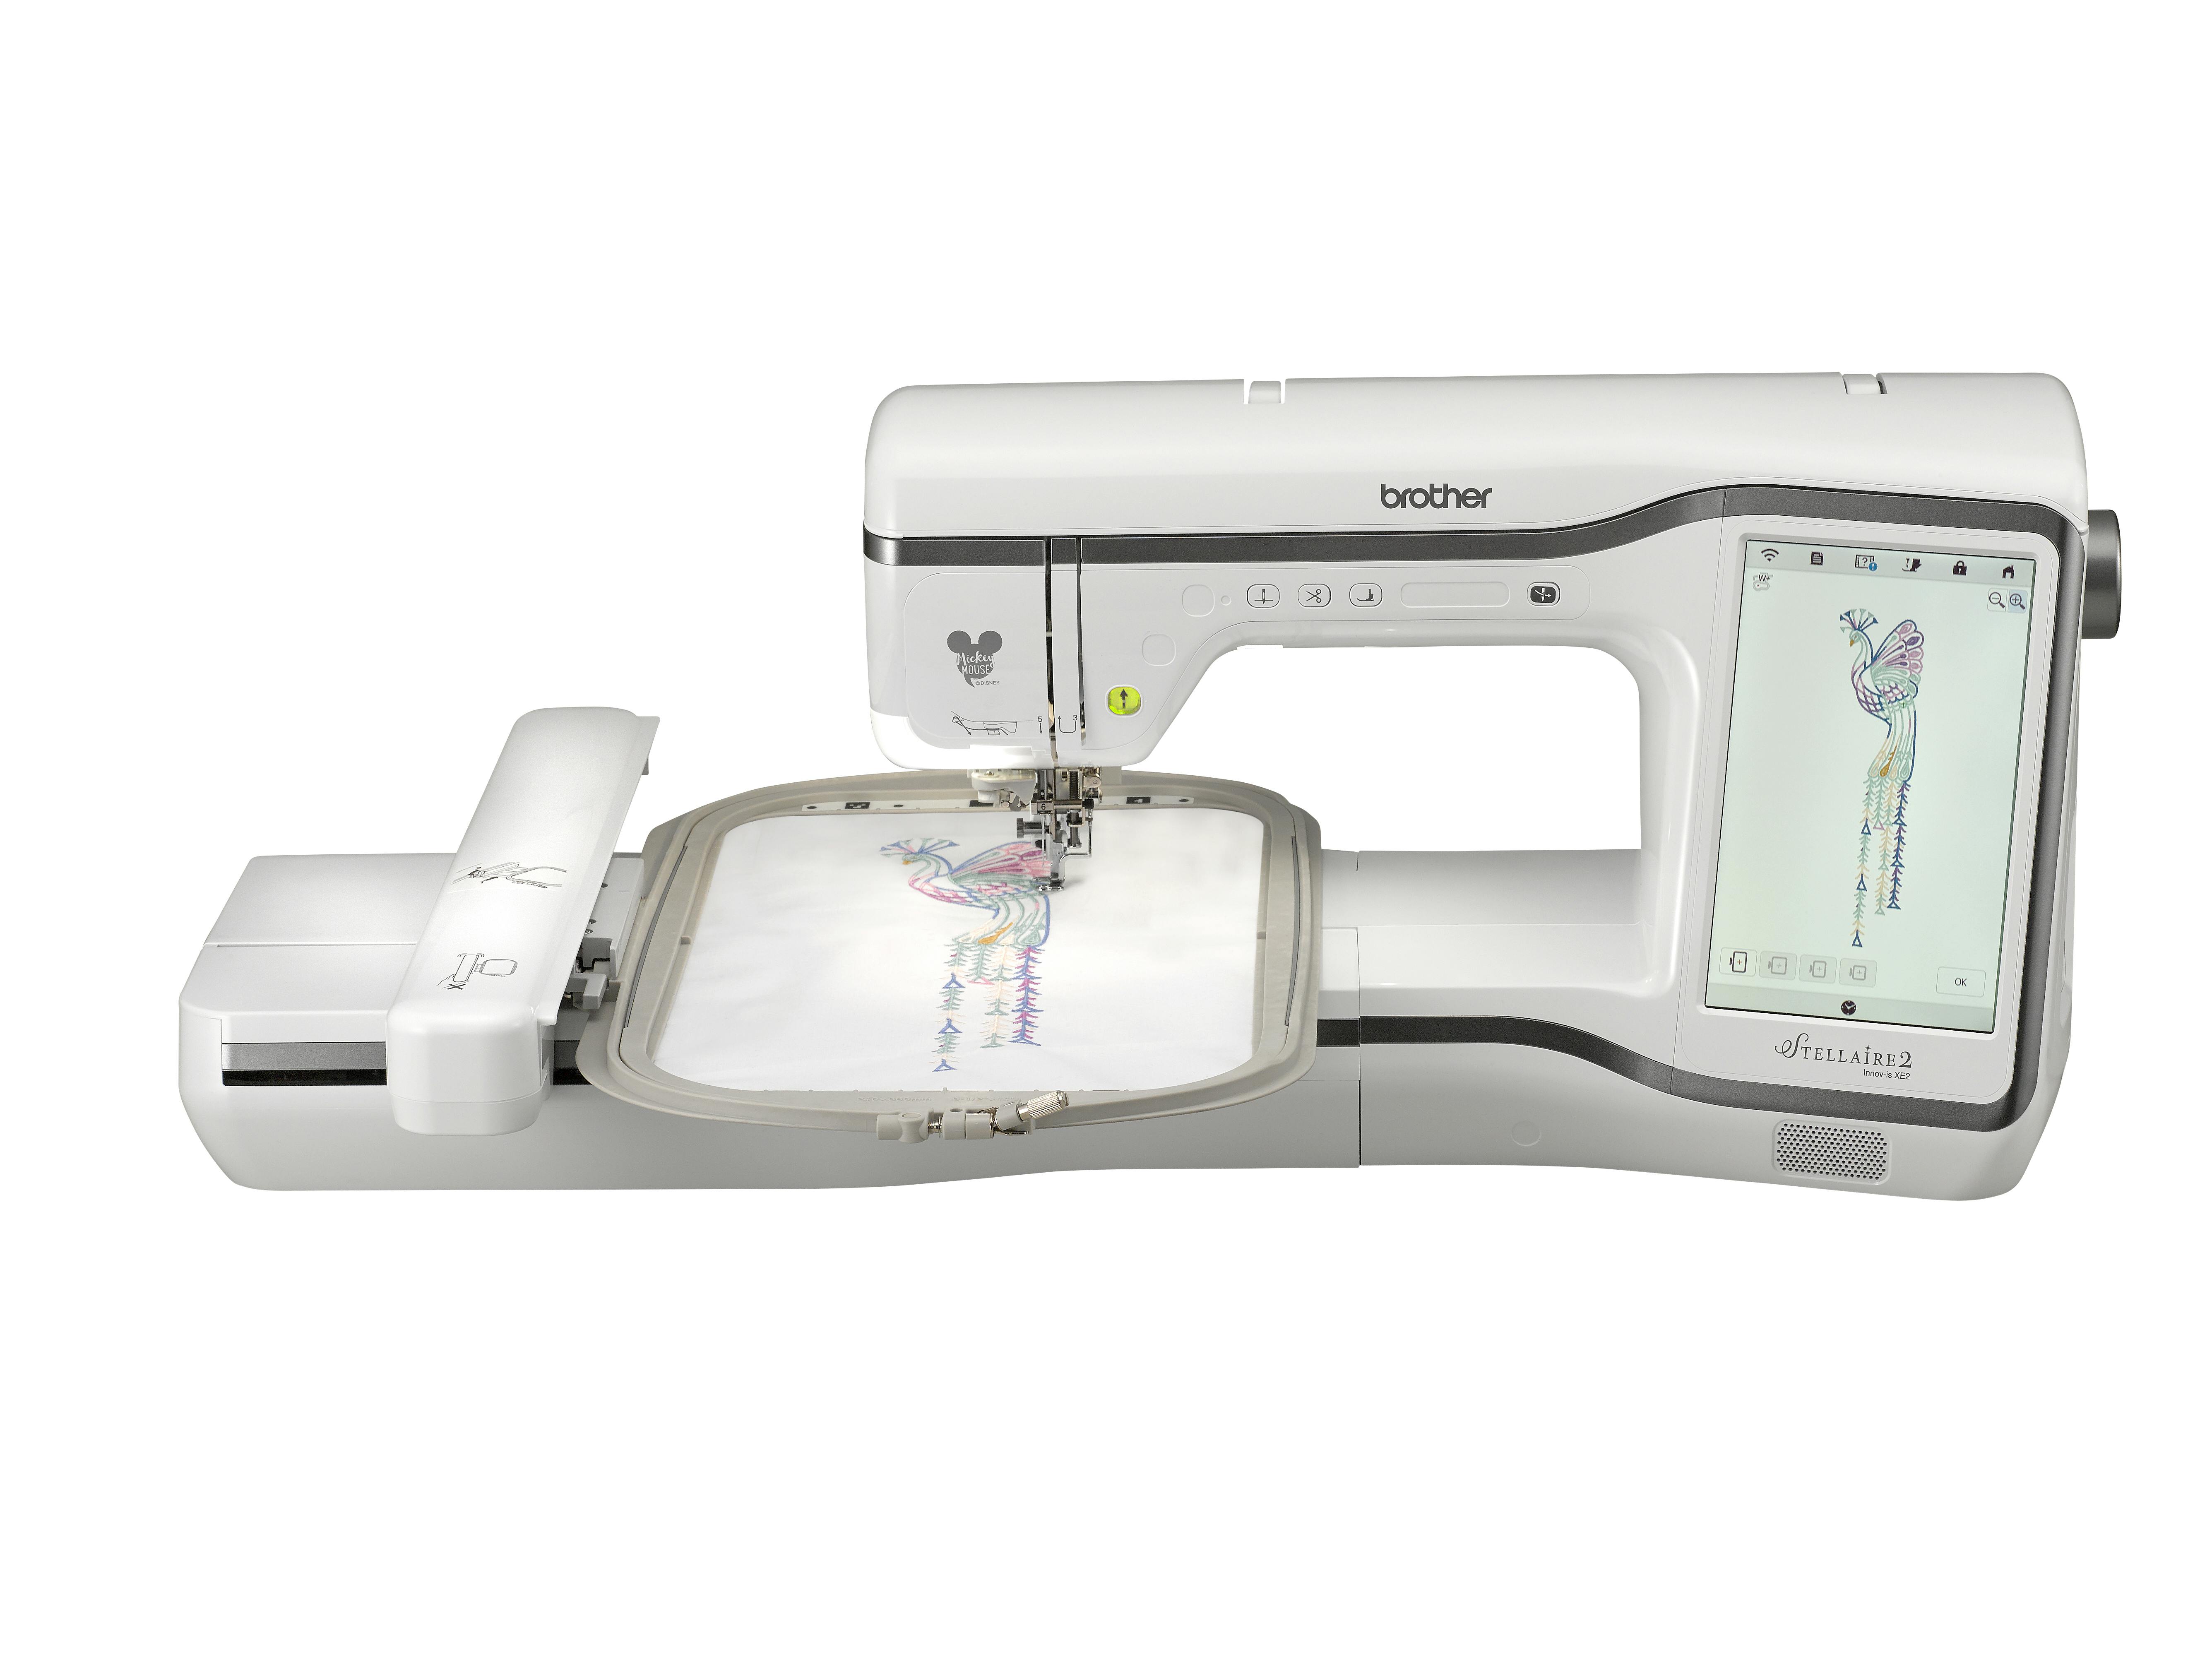 Sewing and Embroidery Machine - Home Sewing Products - Brother